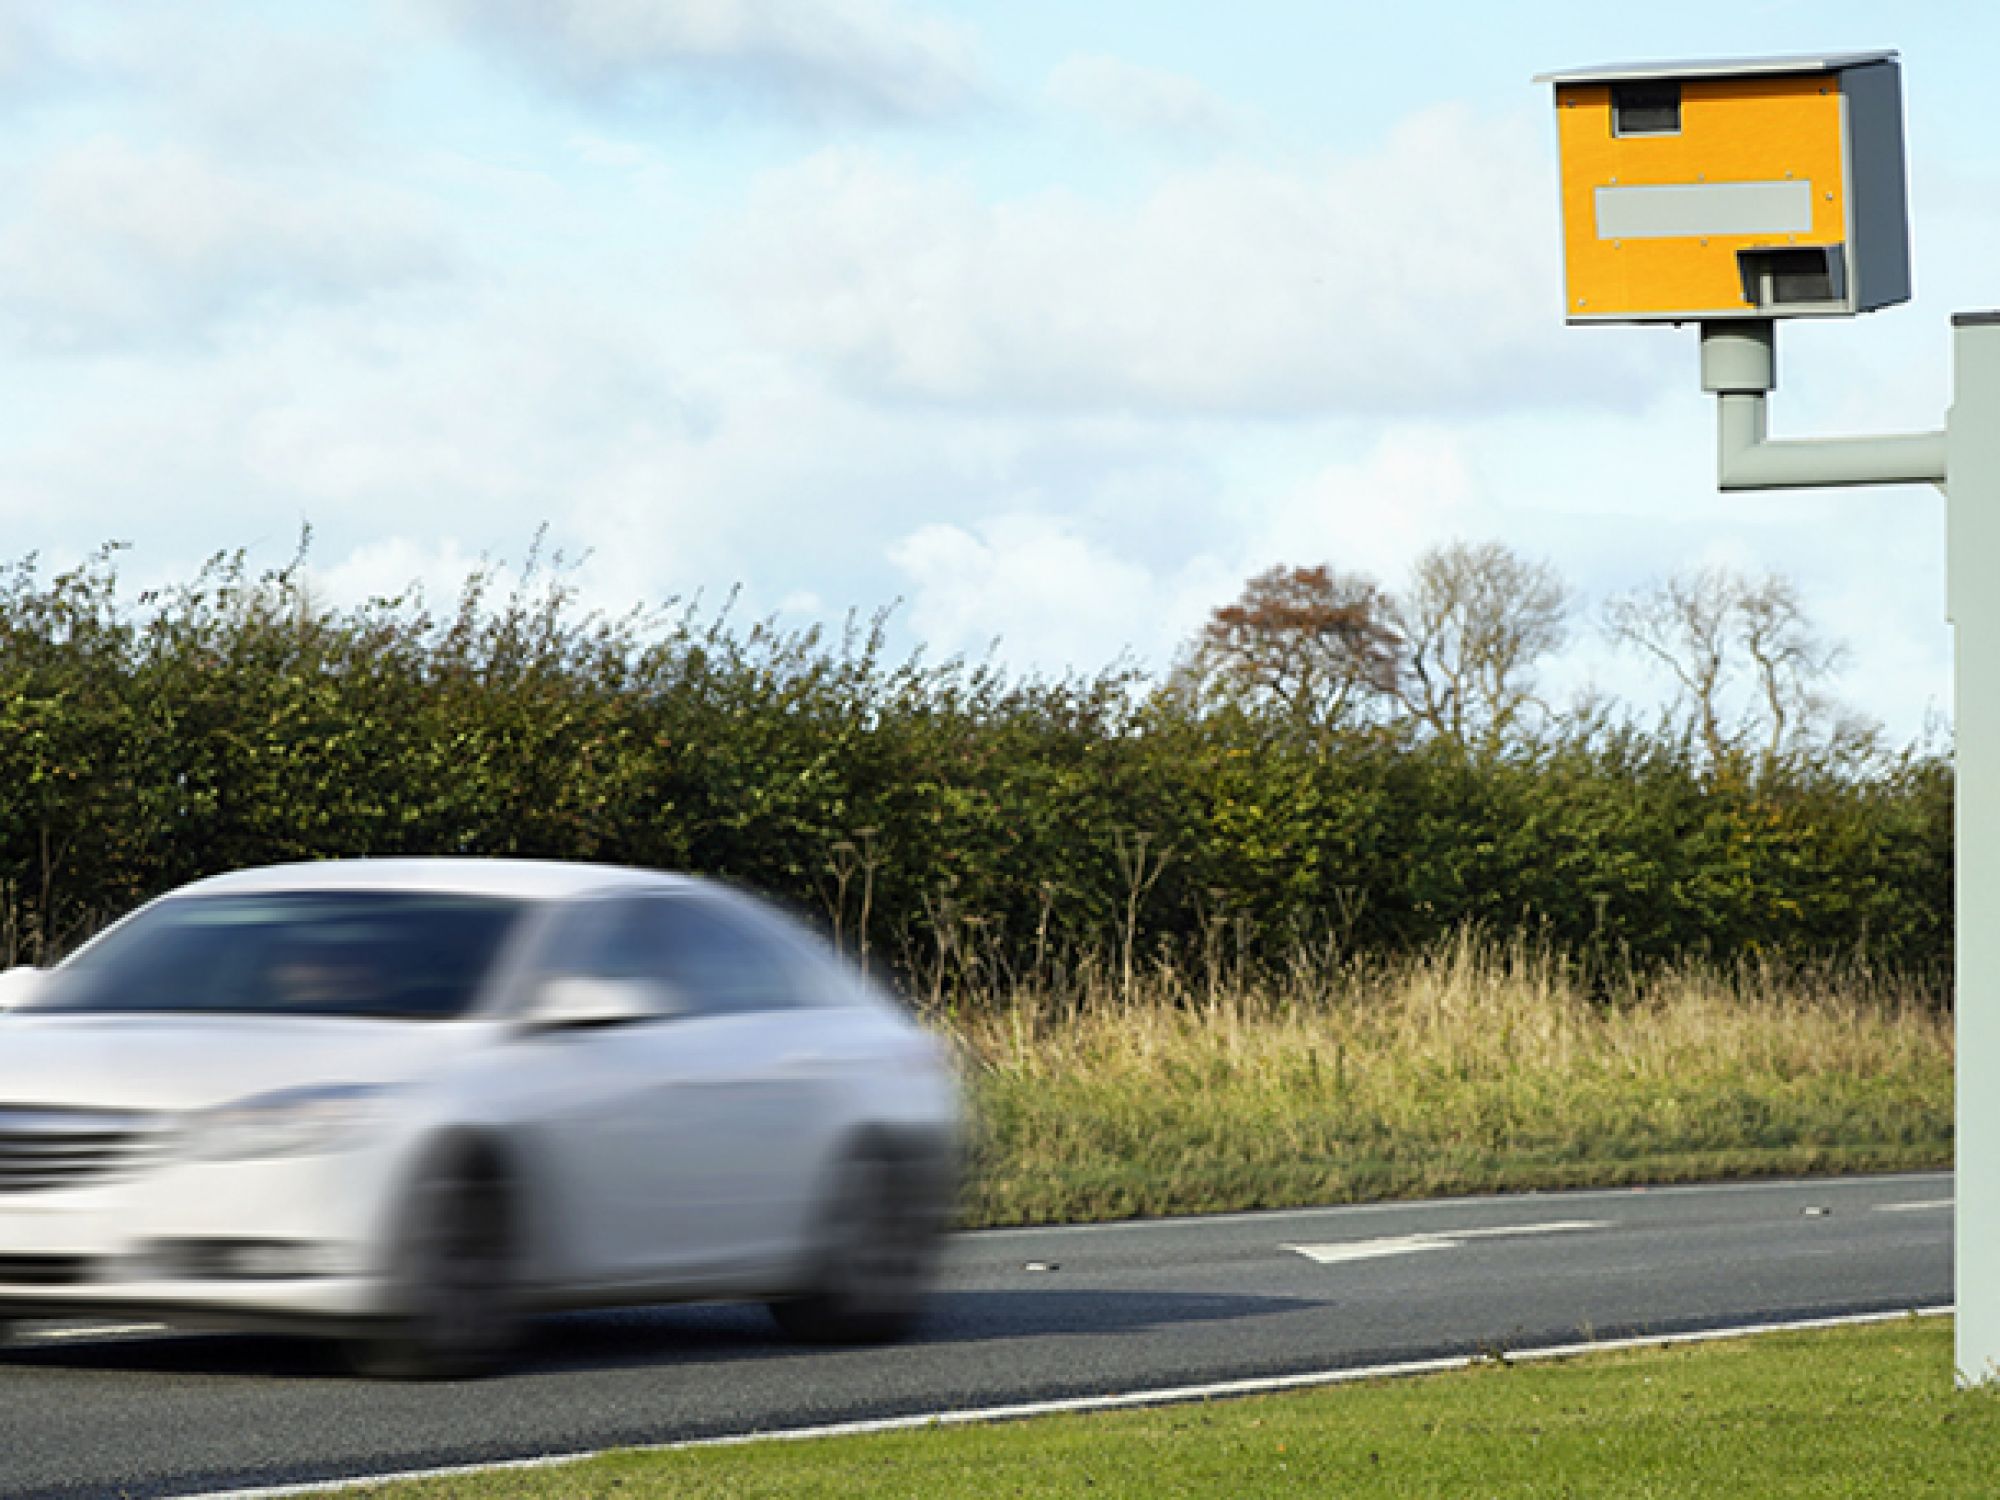 Speed cameras located in “good hunting grounds”